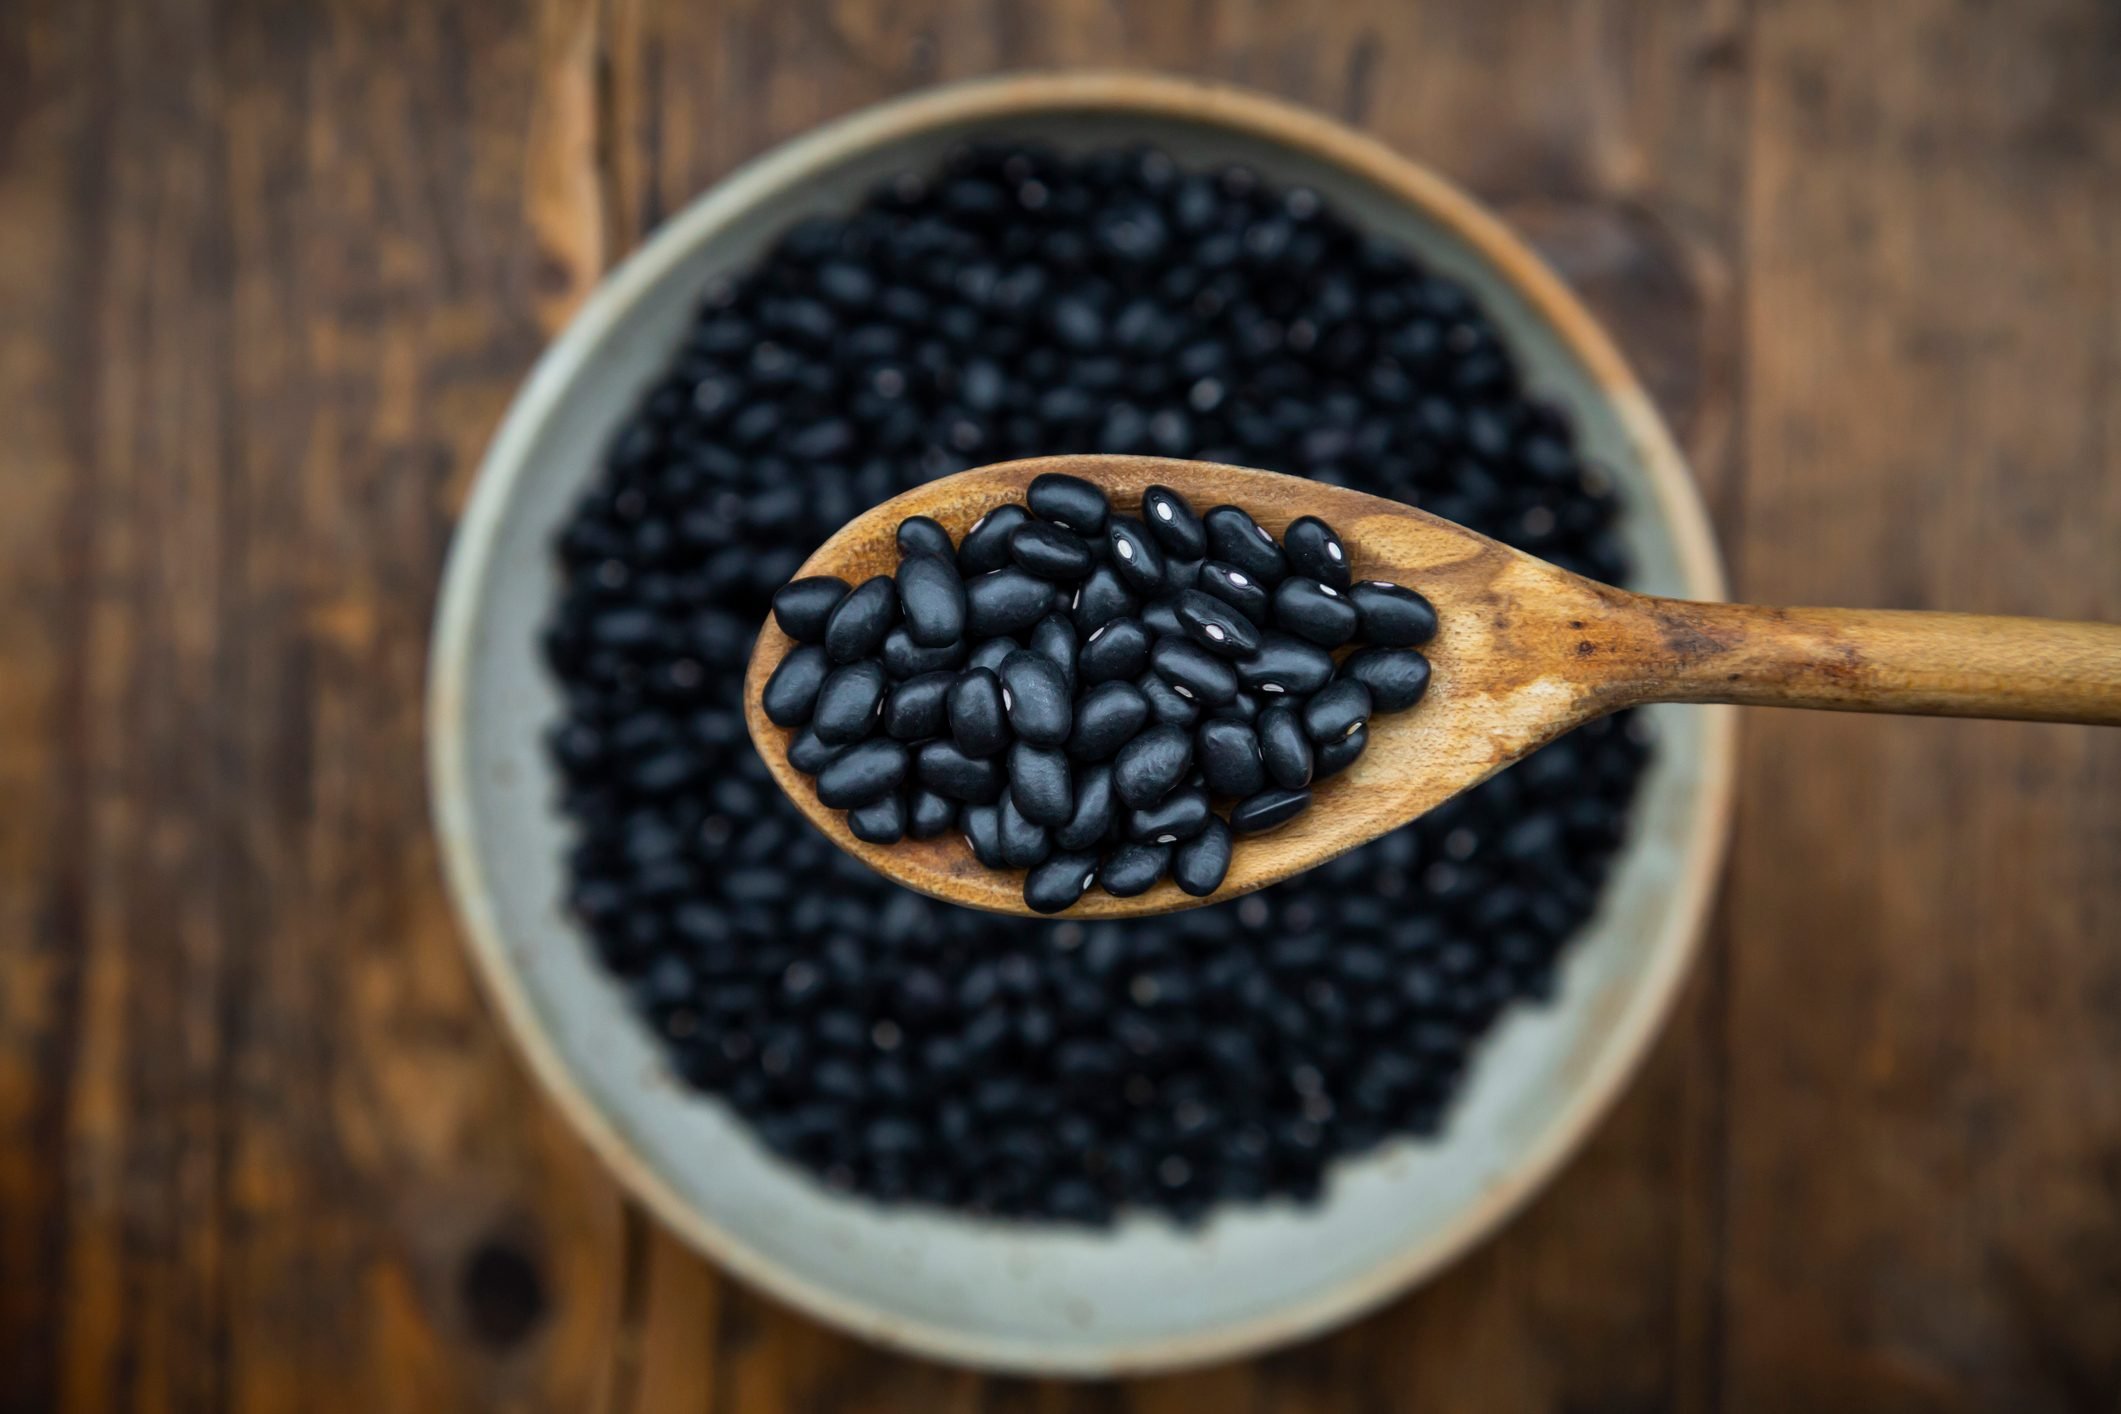 Black Beans Here Are The Calories Protein And Nutrition The Healthy